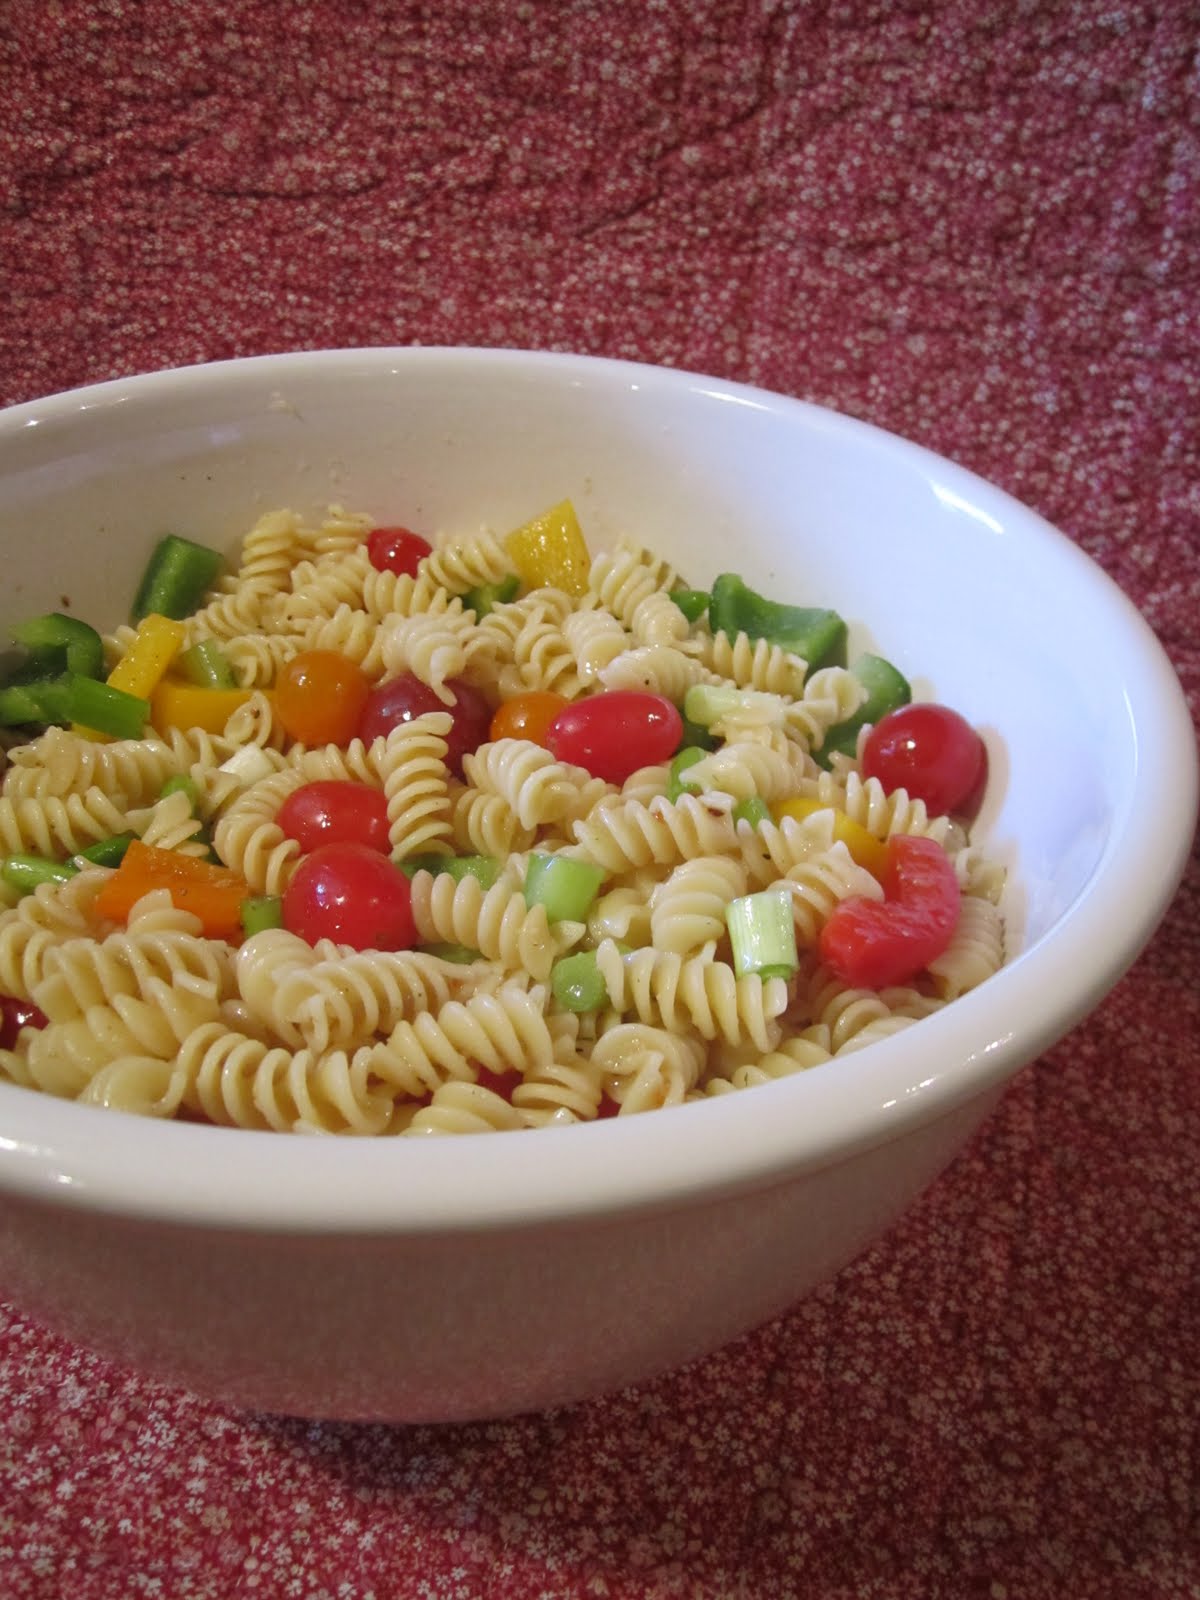 Wendys Hat: How to Make a Cold Pasta Salad Recipe